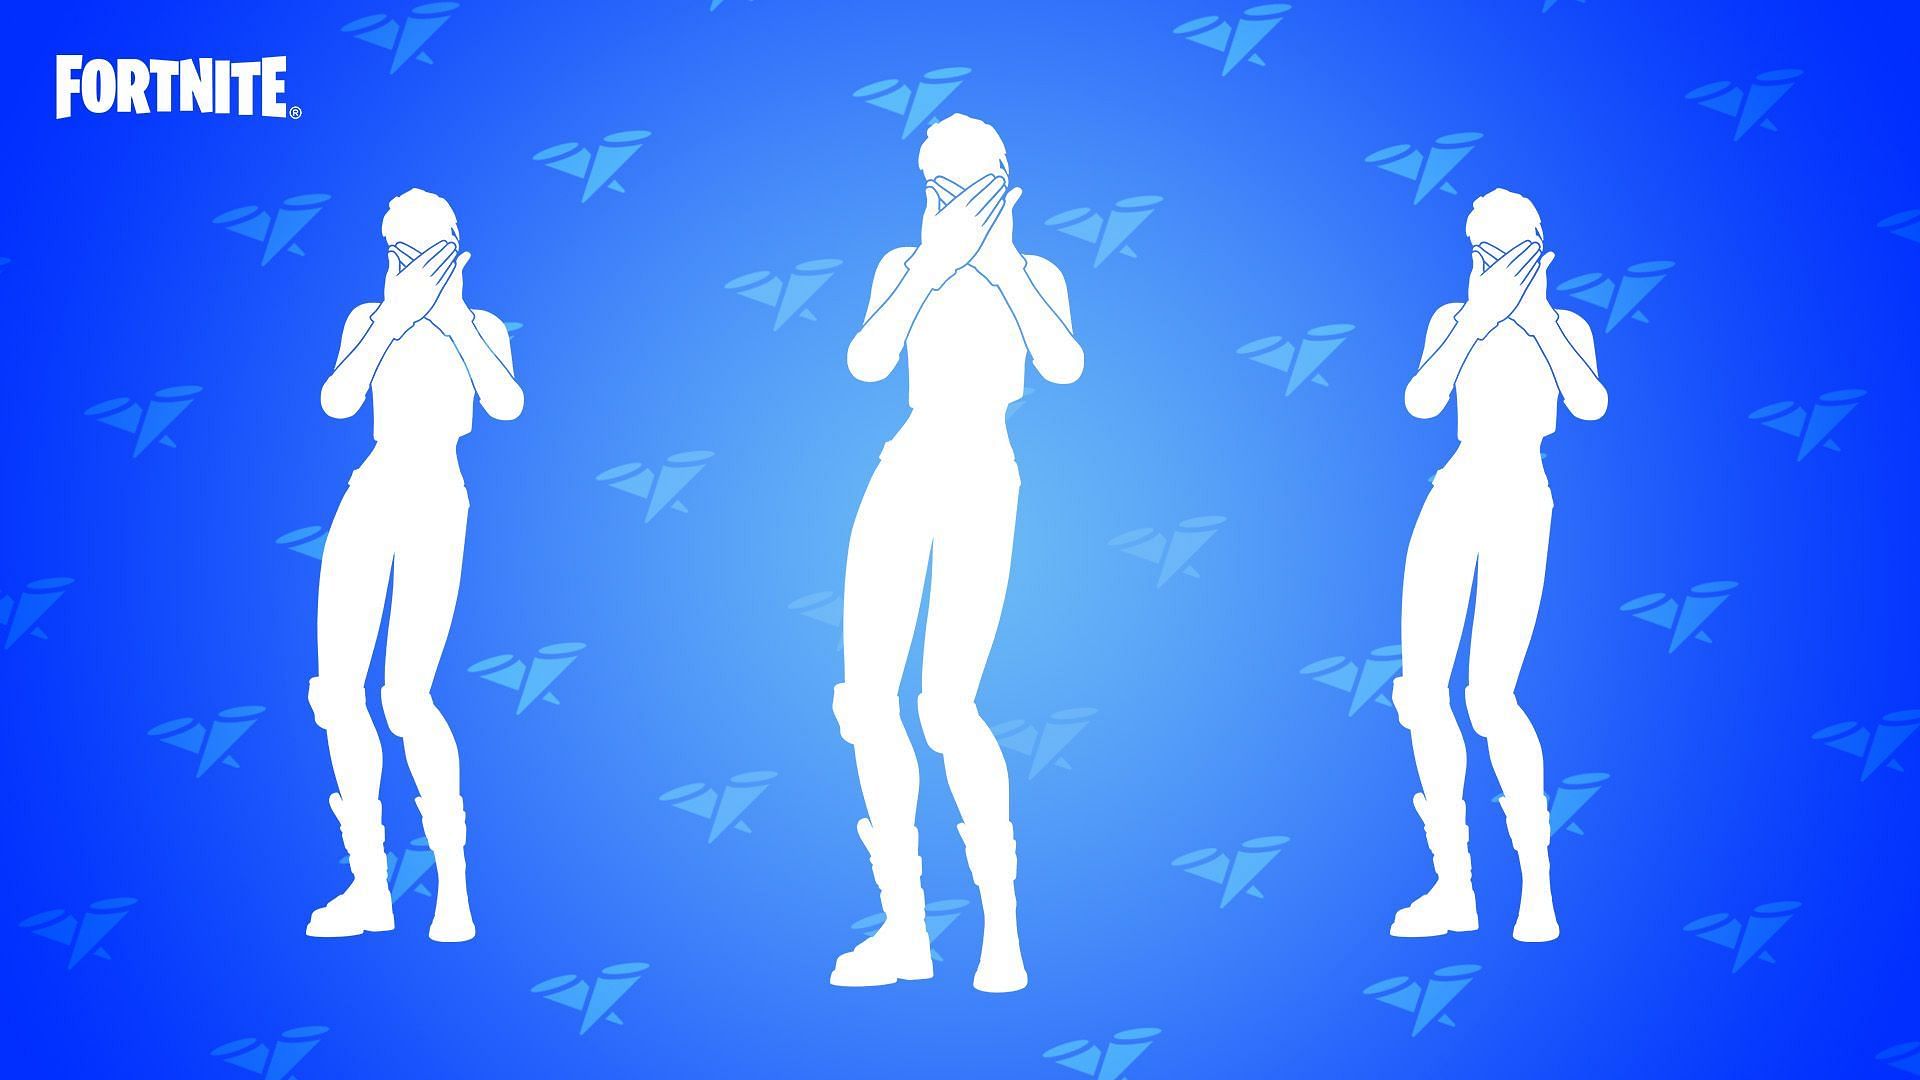 No, Ice Spice is not getting an Icon Series Outfit in Fortnite (Image via Epic Games/Fortnite)